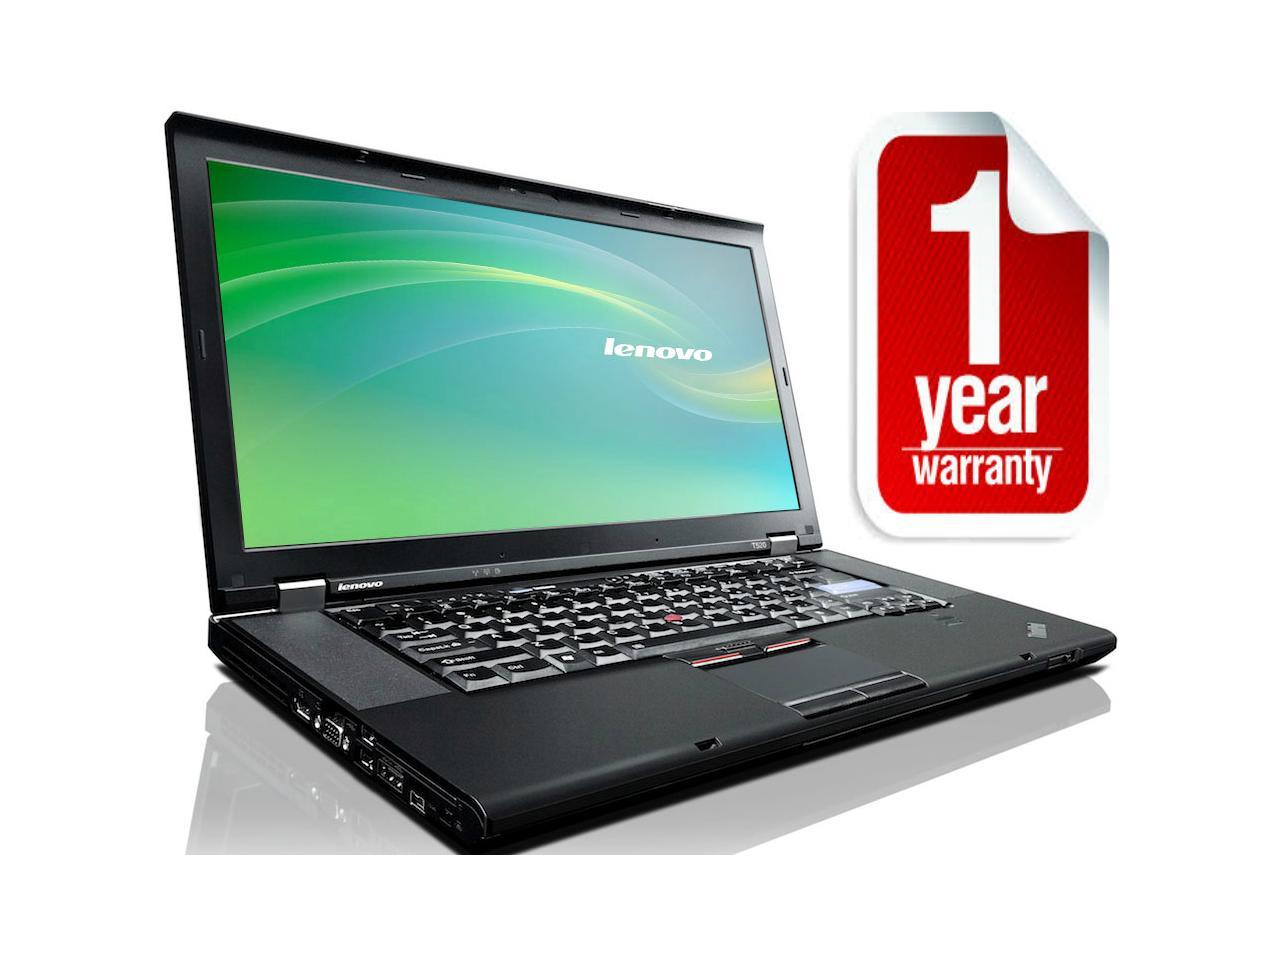 Lenovo Thinkpad T430 T530 500GB Hard Drive with 7 Pro 64 & Drivers Preinstalled 